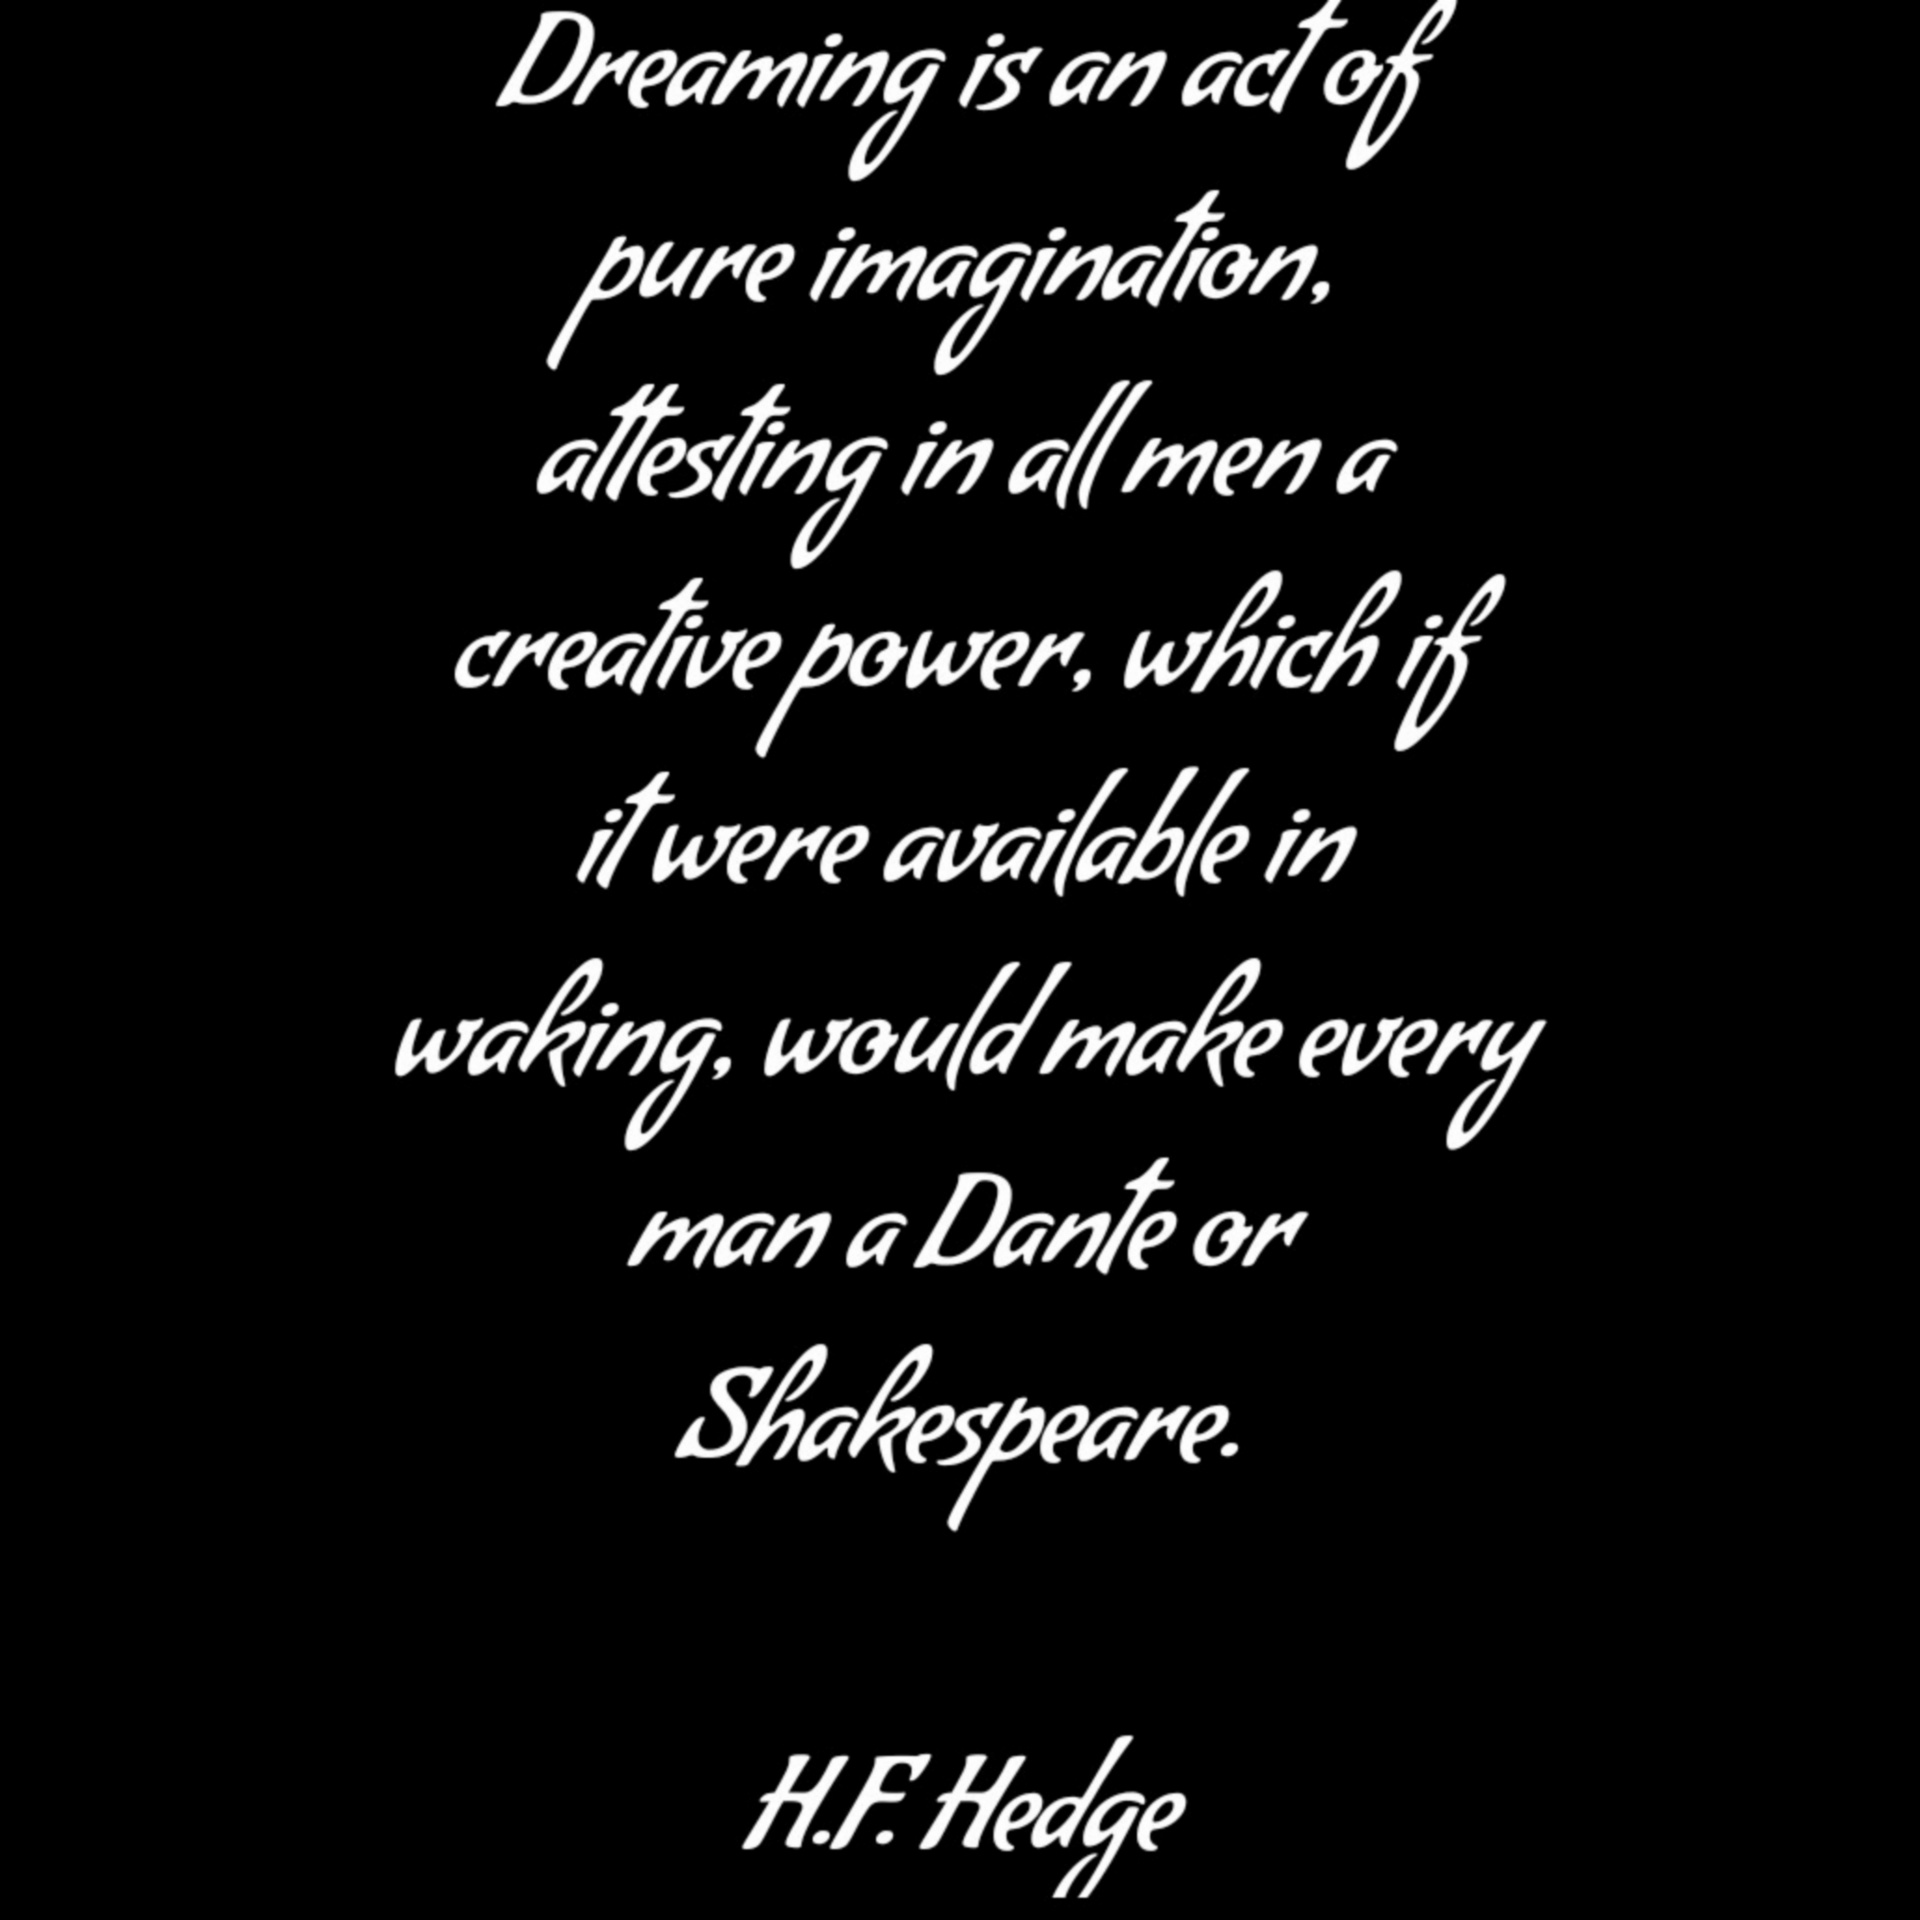 Dreaming is an act of pure imagination, attesting in all men a creative power, which if it were available in waking, would make every man a Dante or Shakespeare. H.F. Hedge